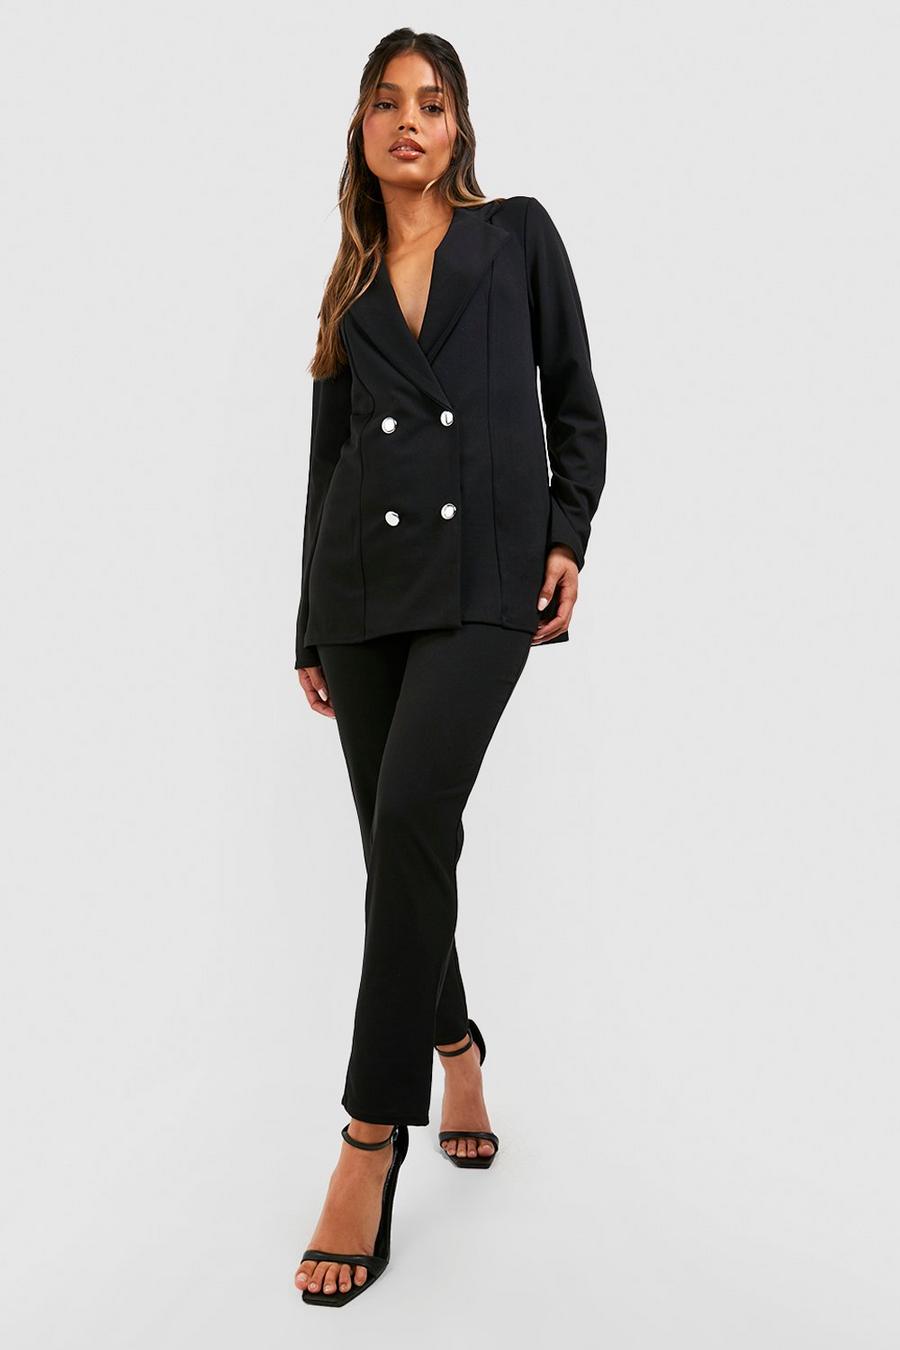 Black Jersey Double Breasted Blazer And Trouser Suit Set